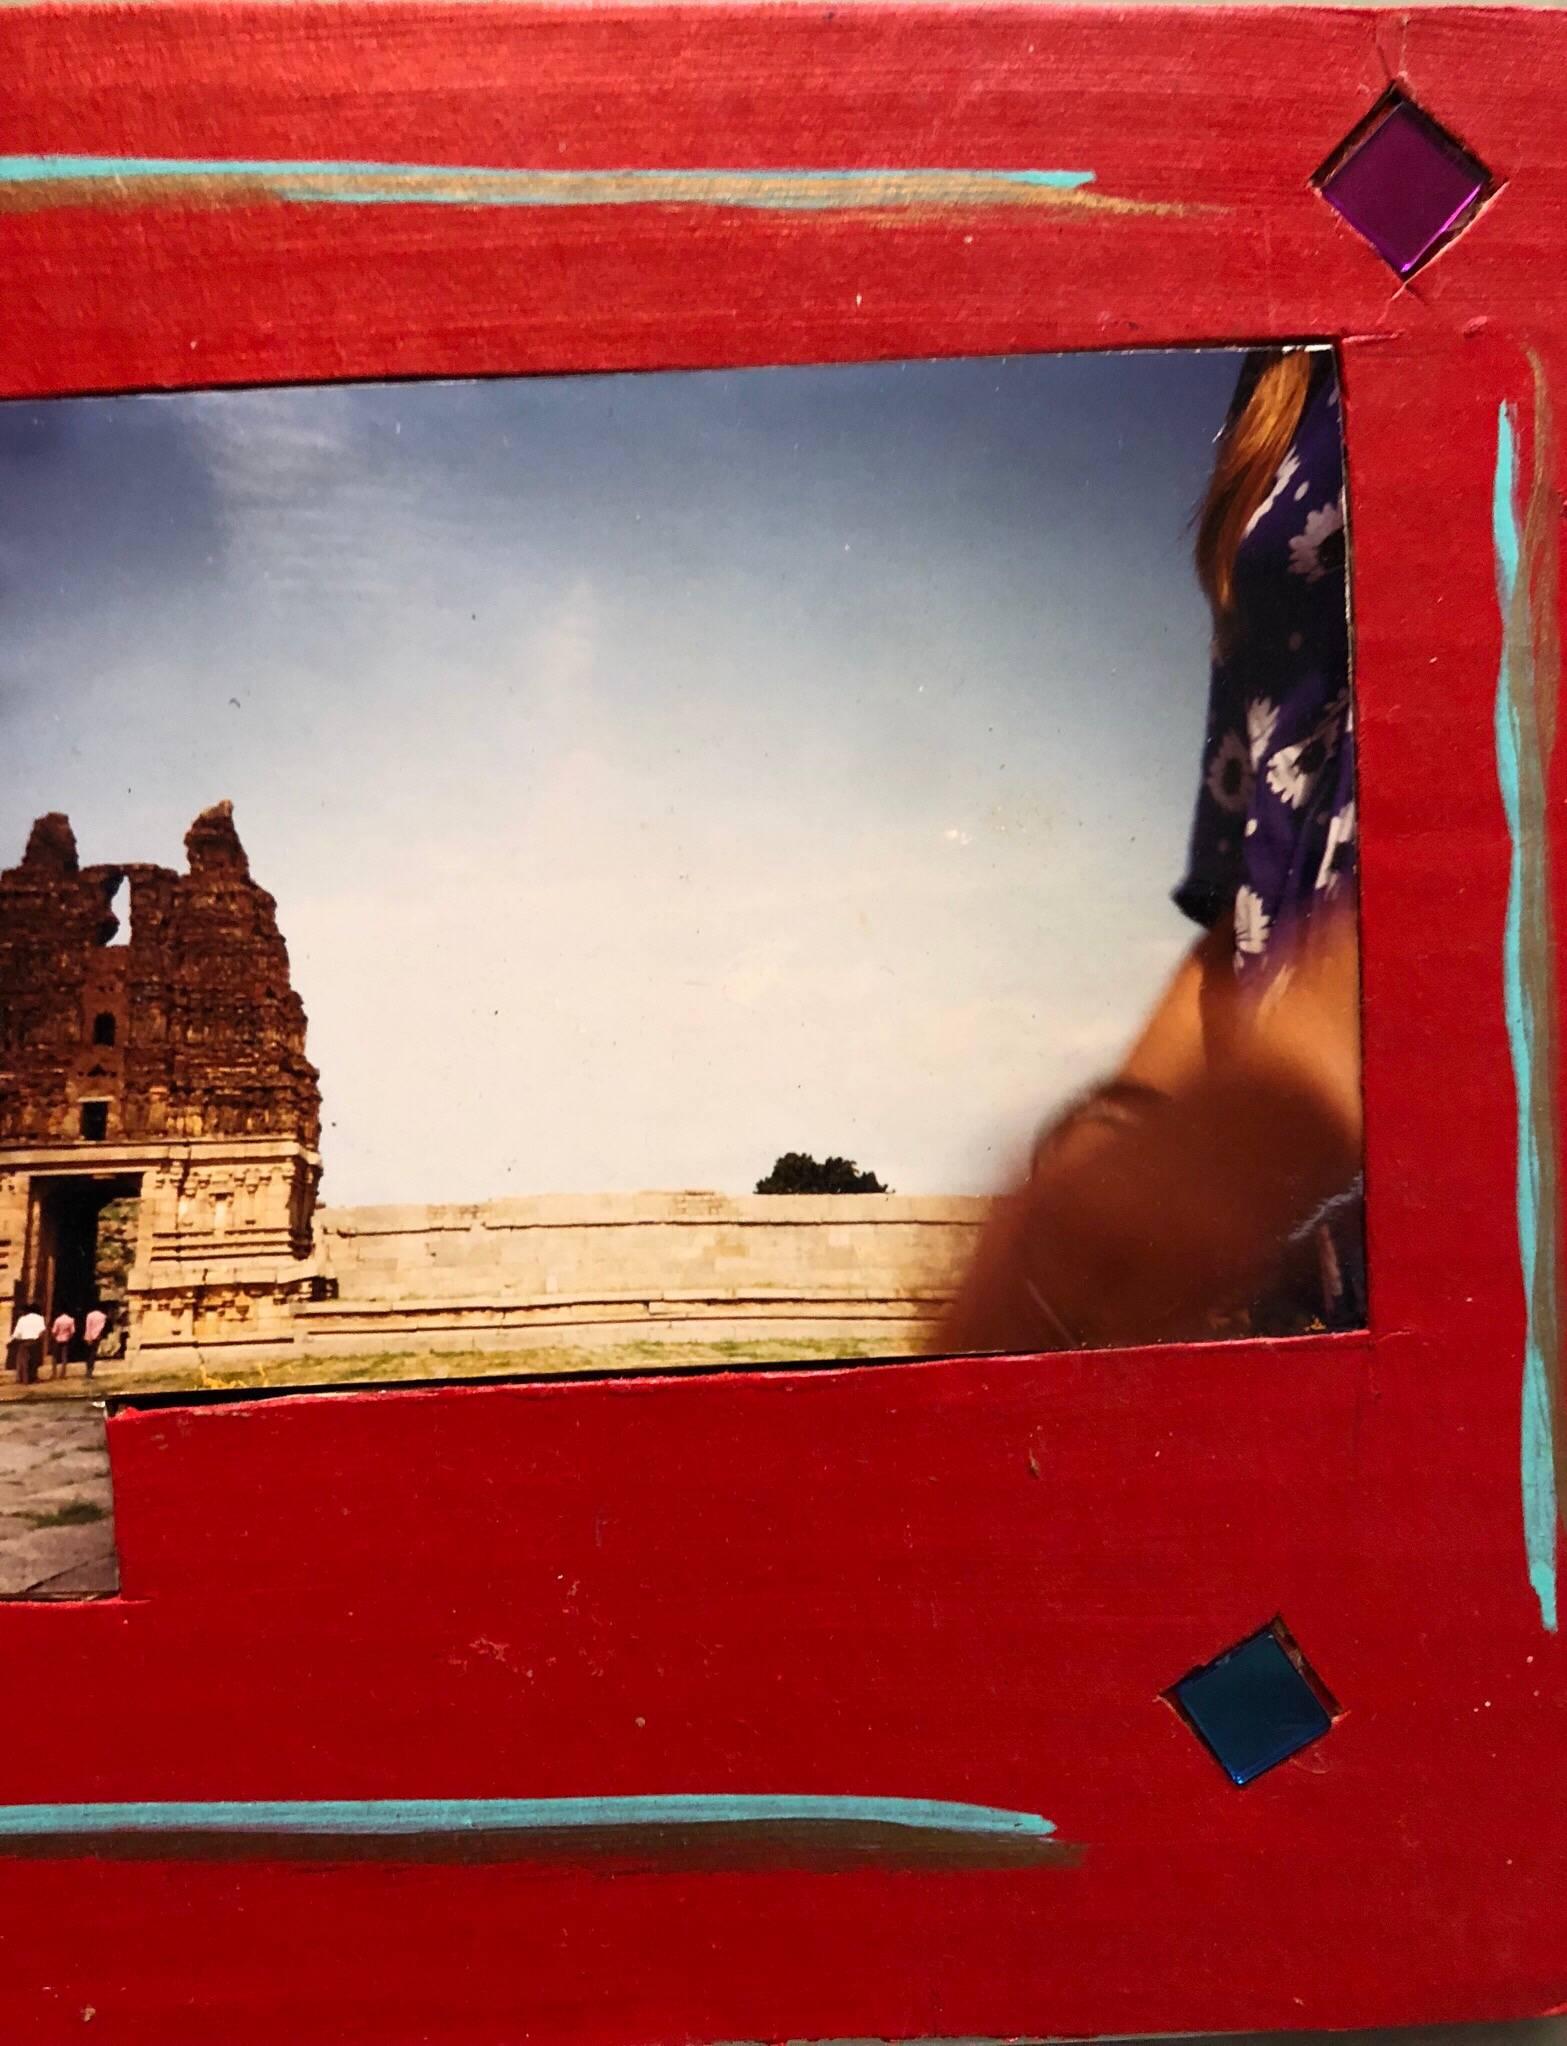 Tourists Hampi, India, 1992, Photo Prints on Cardboard, Collage, Mirror Insets - Contemporary Painting by Kim MacConnel